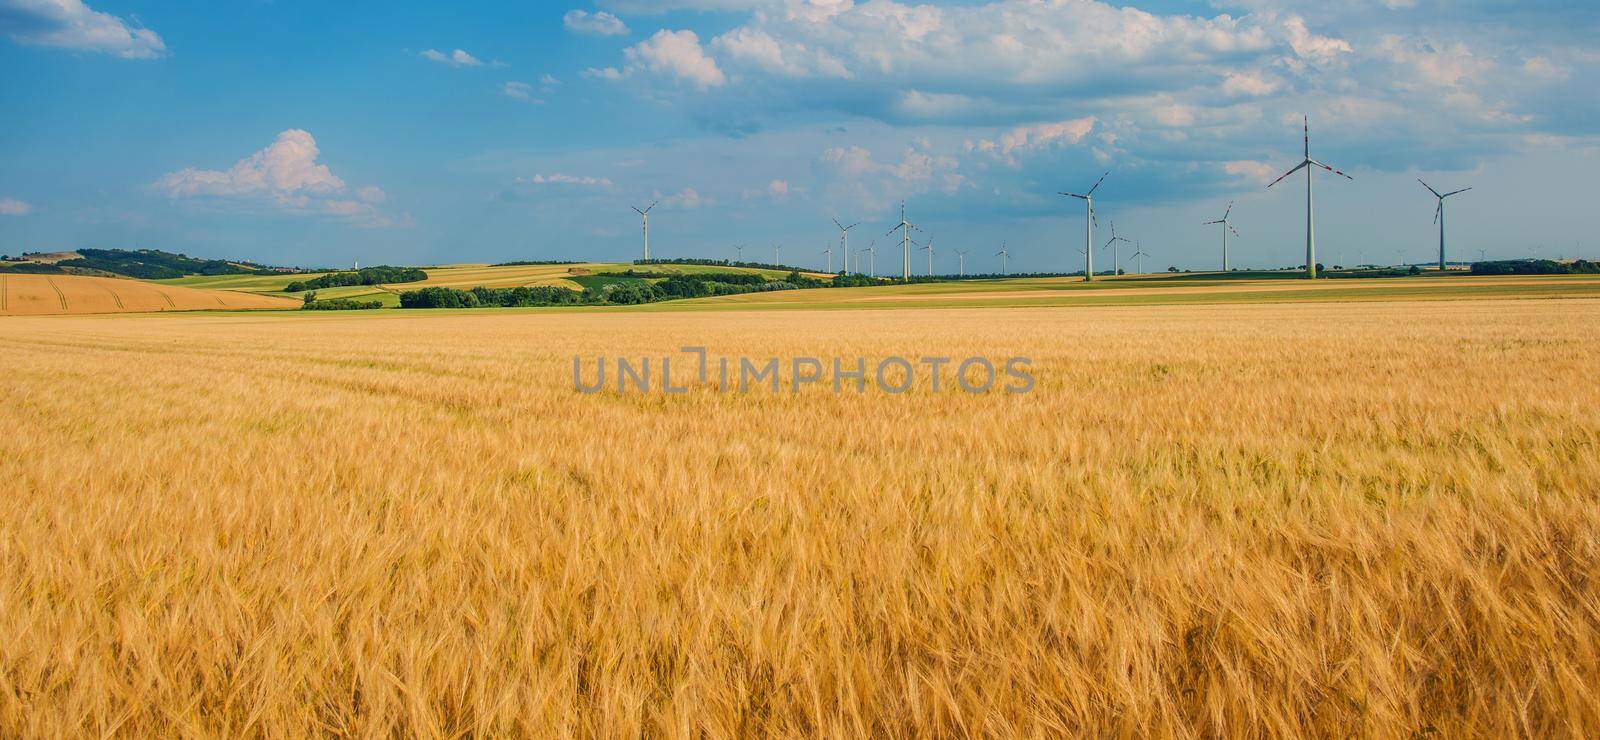 Panoramic View Of Field Of Golden Wheat With Wind Mills In Background. 